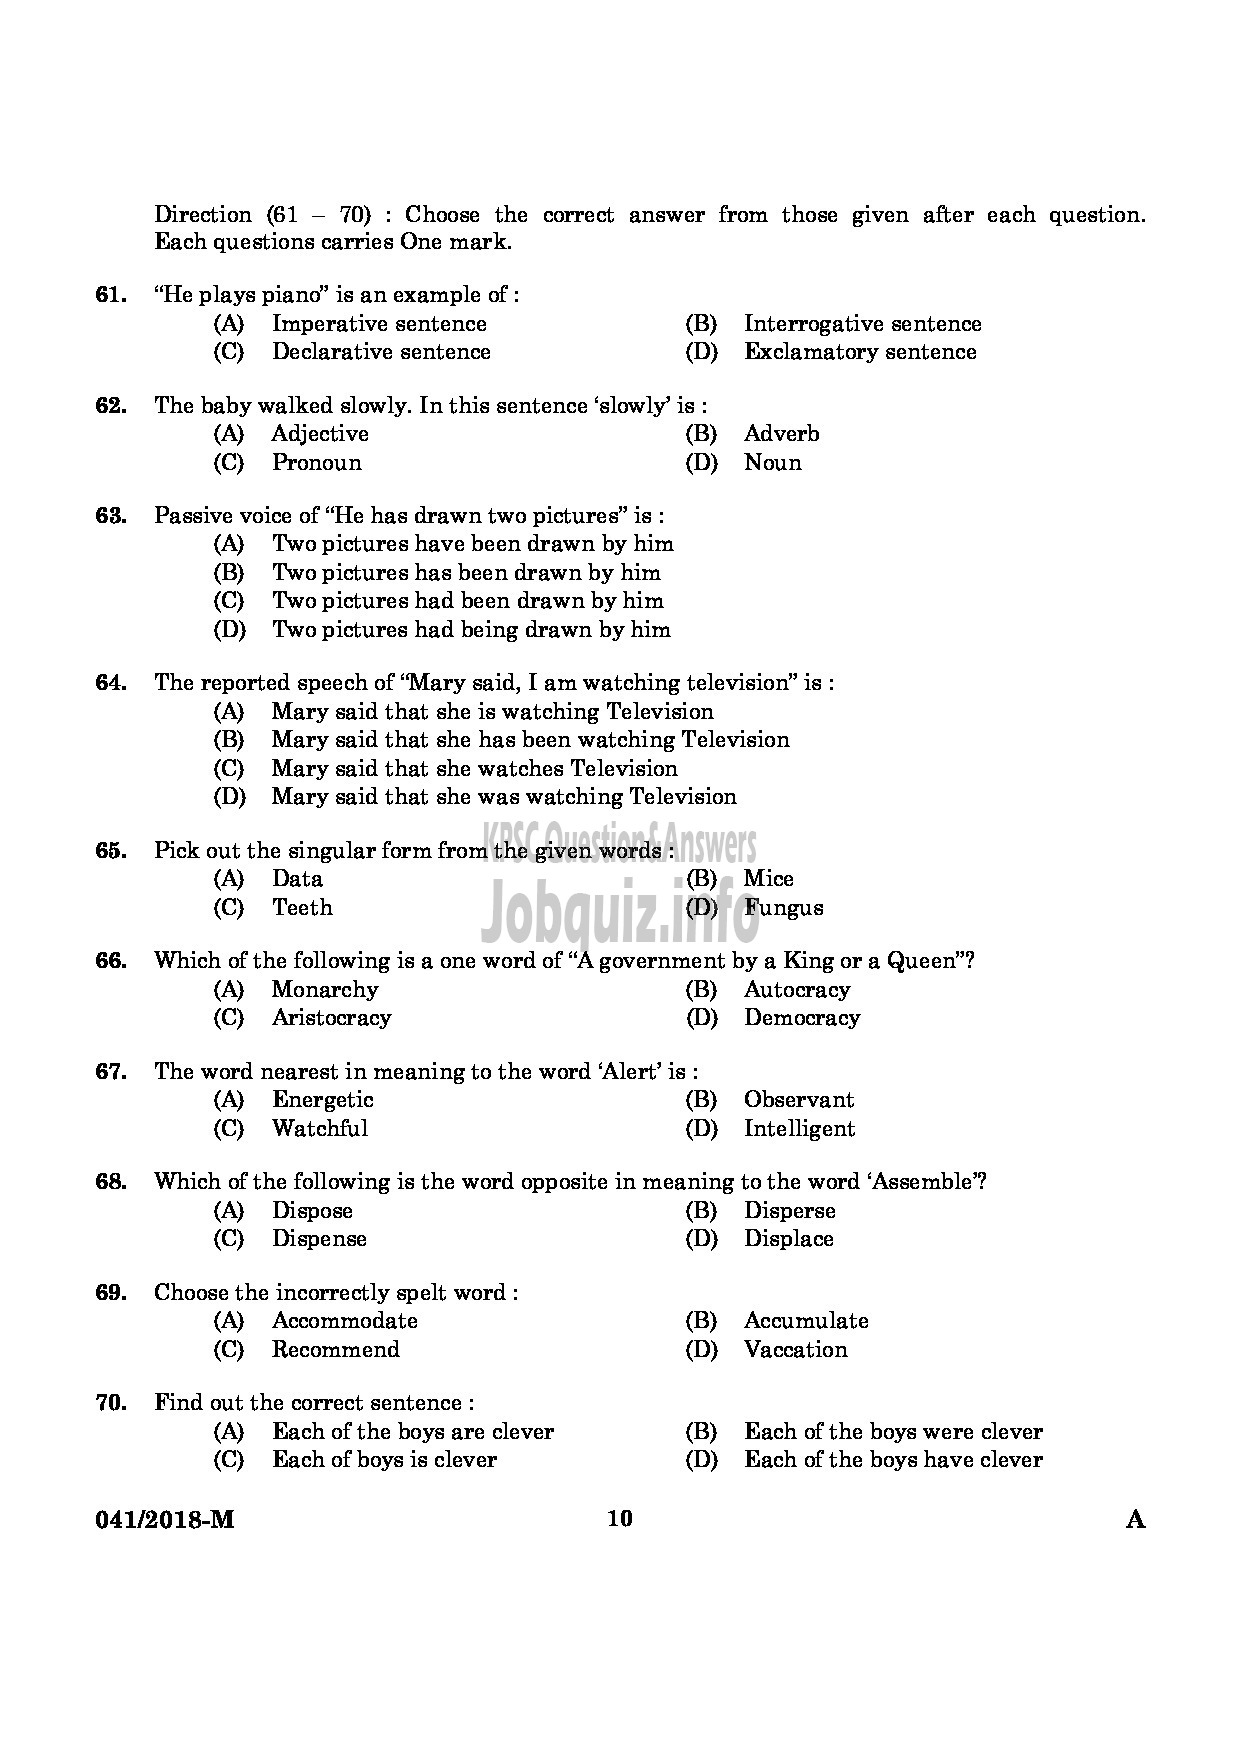 Kerala PSC Question Paper - WOMEN POLICE CONSTABLE NCA LC/AI AND MUSLIM POLICE MALAYALAM-8